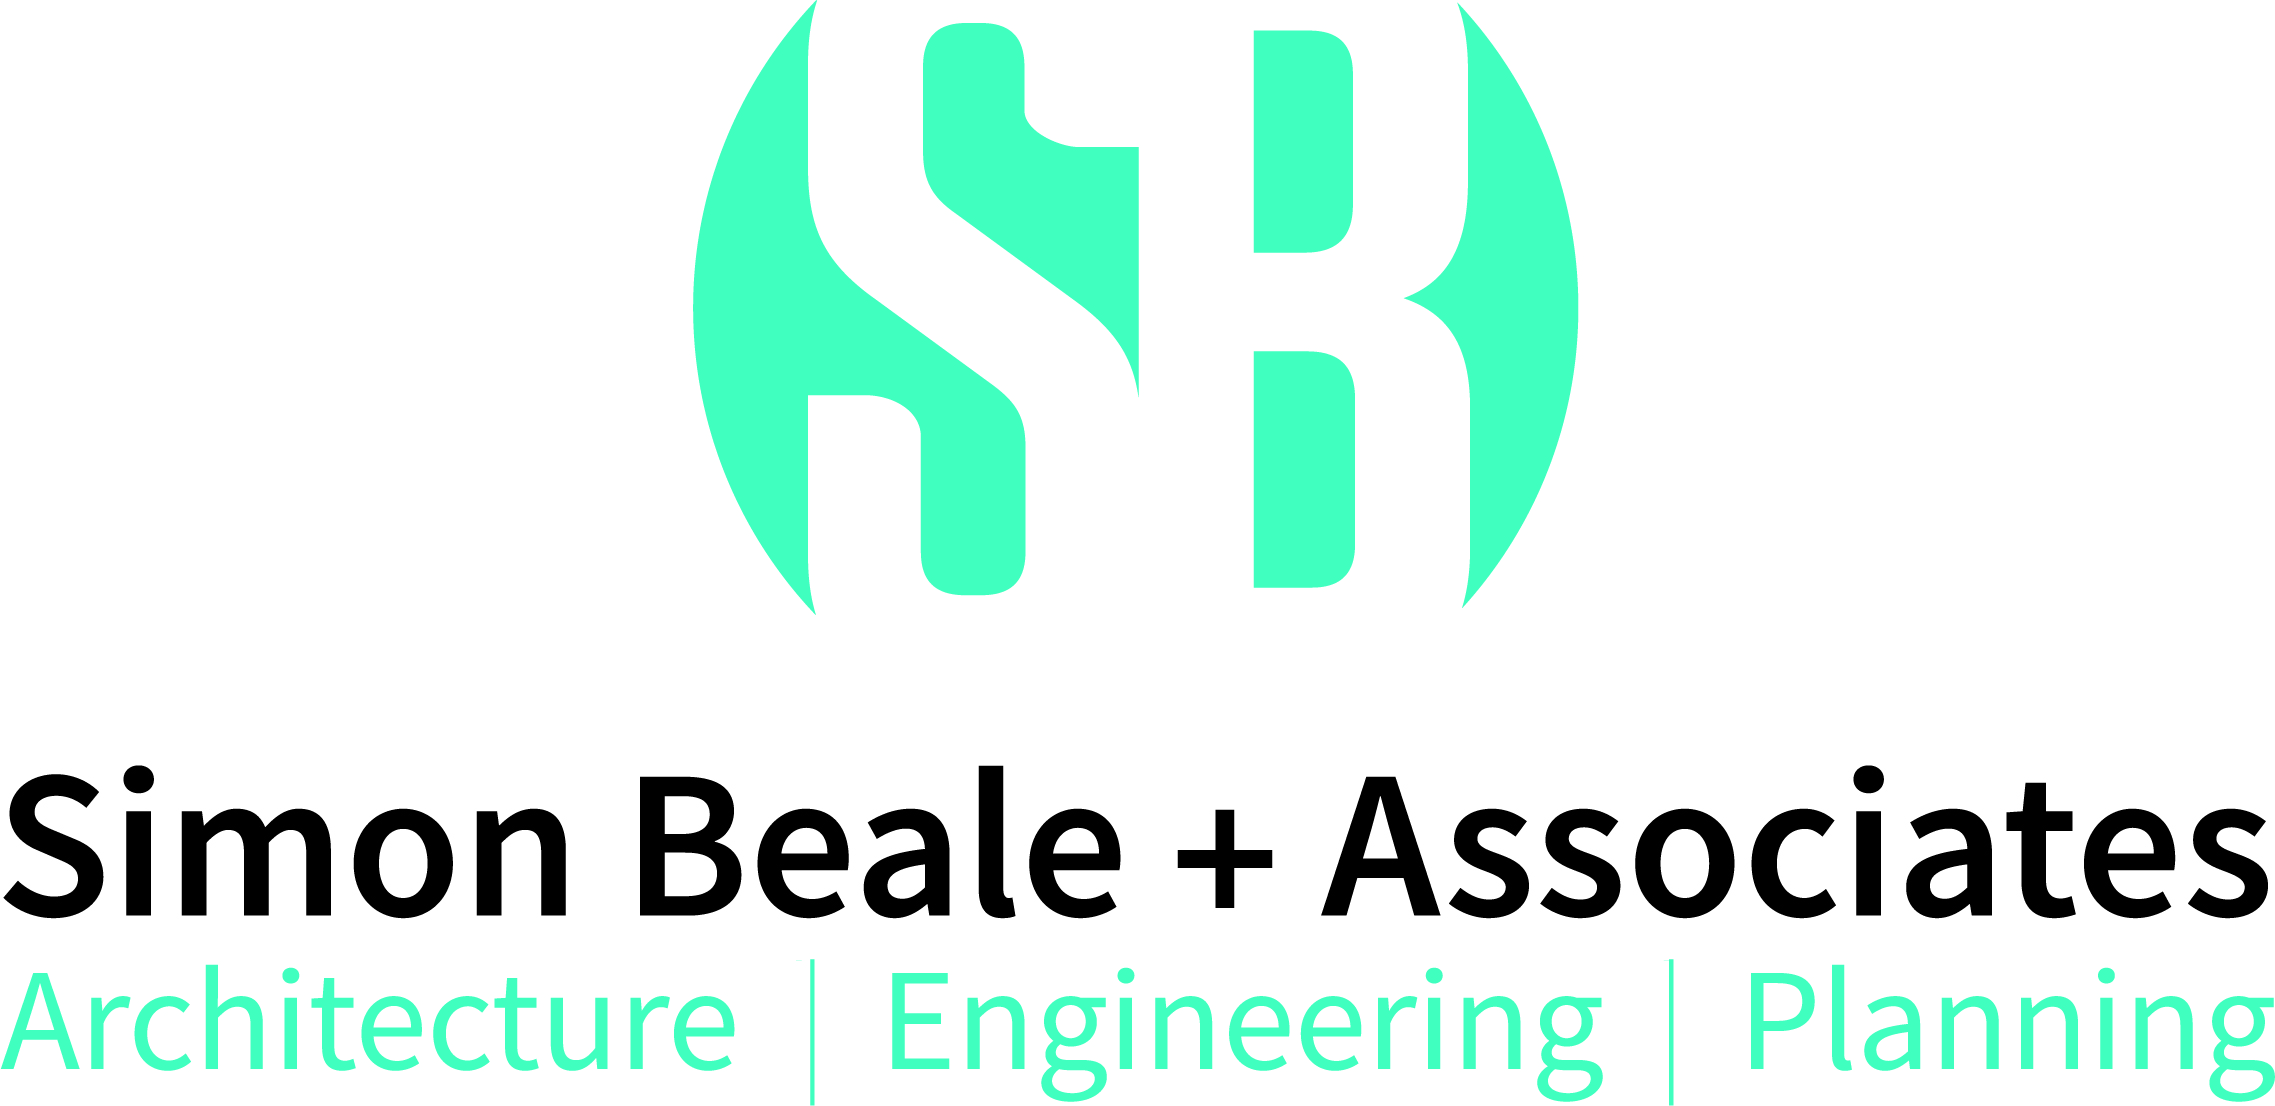 Beale & Associates is one of the sponsors of our U13 A team's kit.